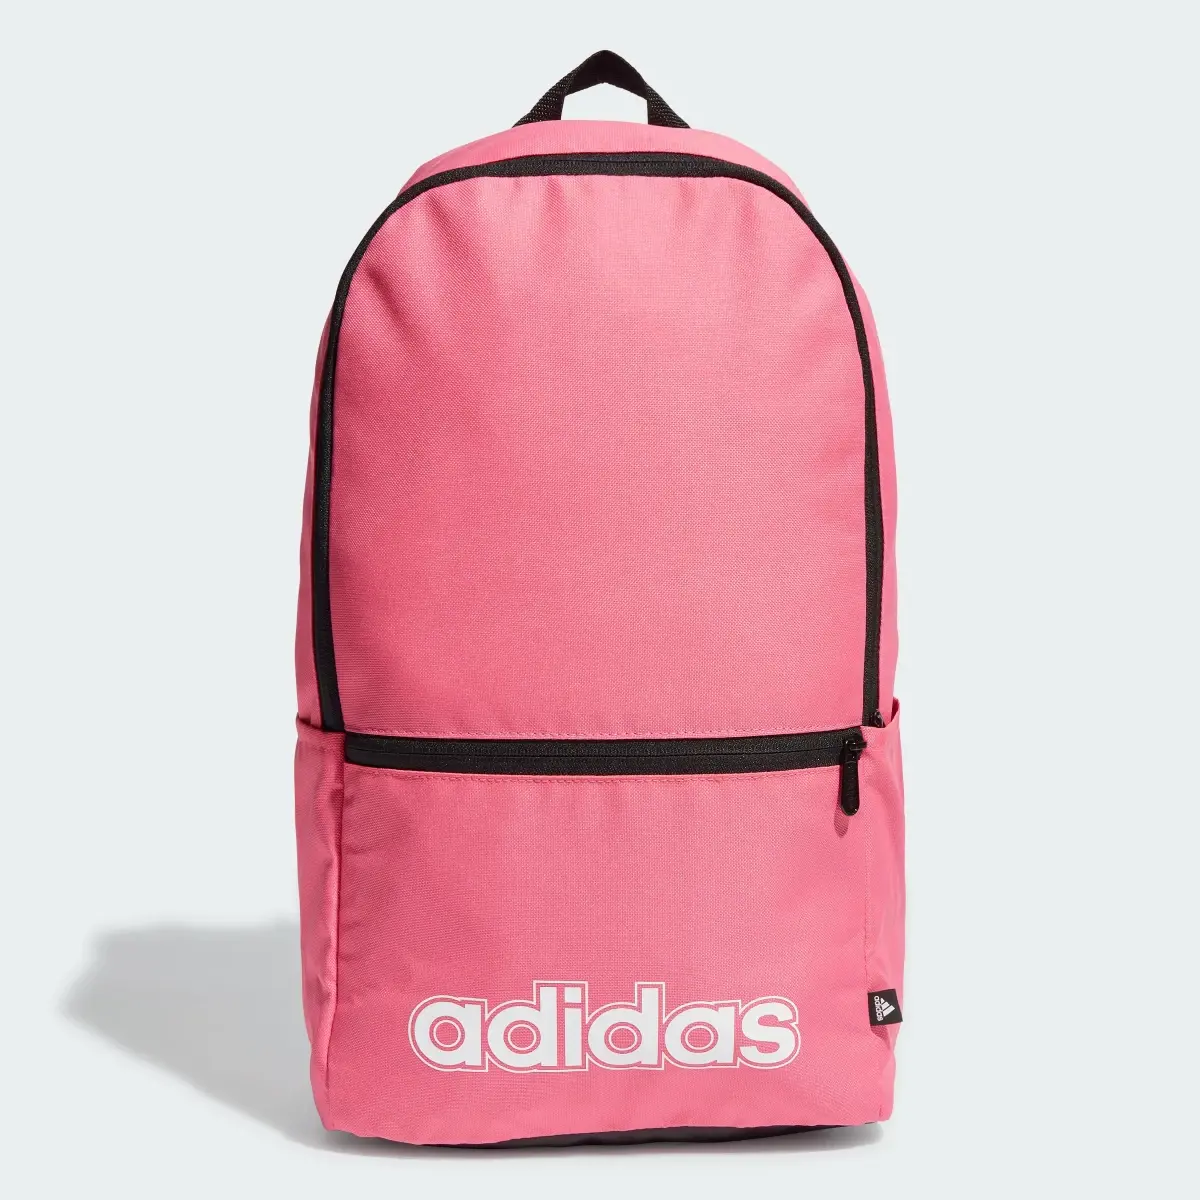 Adidas Classic Foundation Backpack. 1